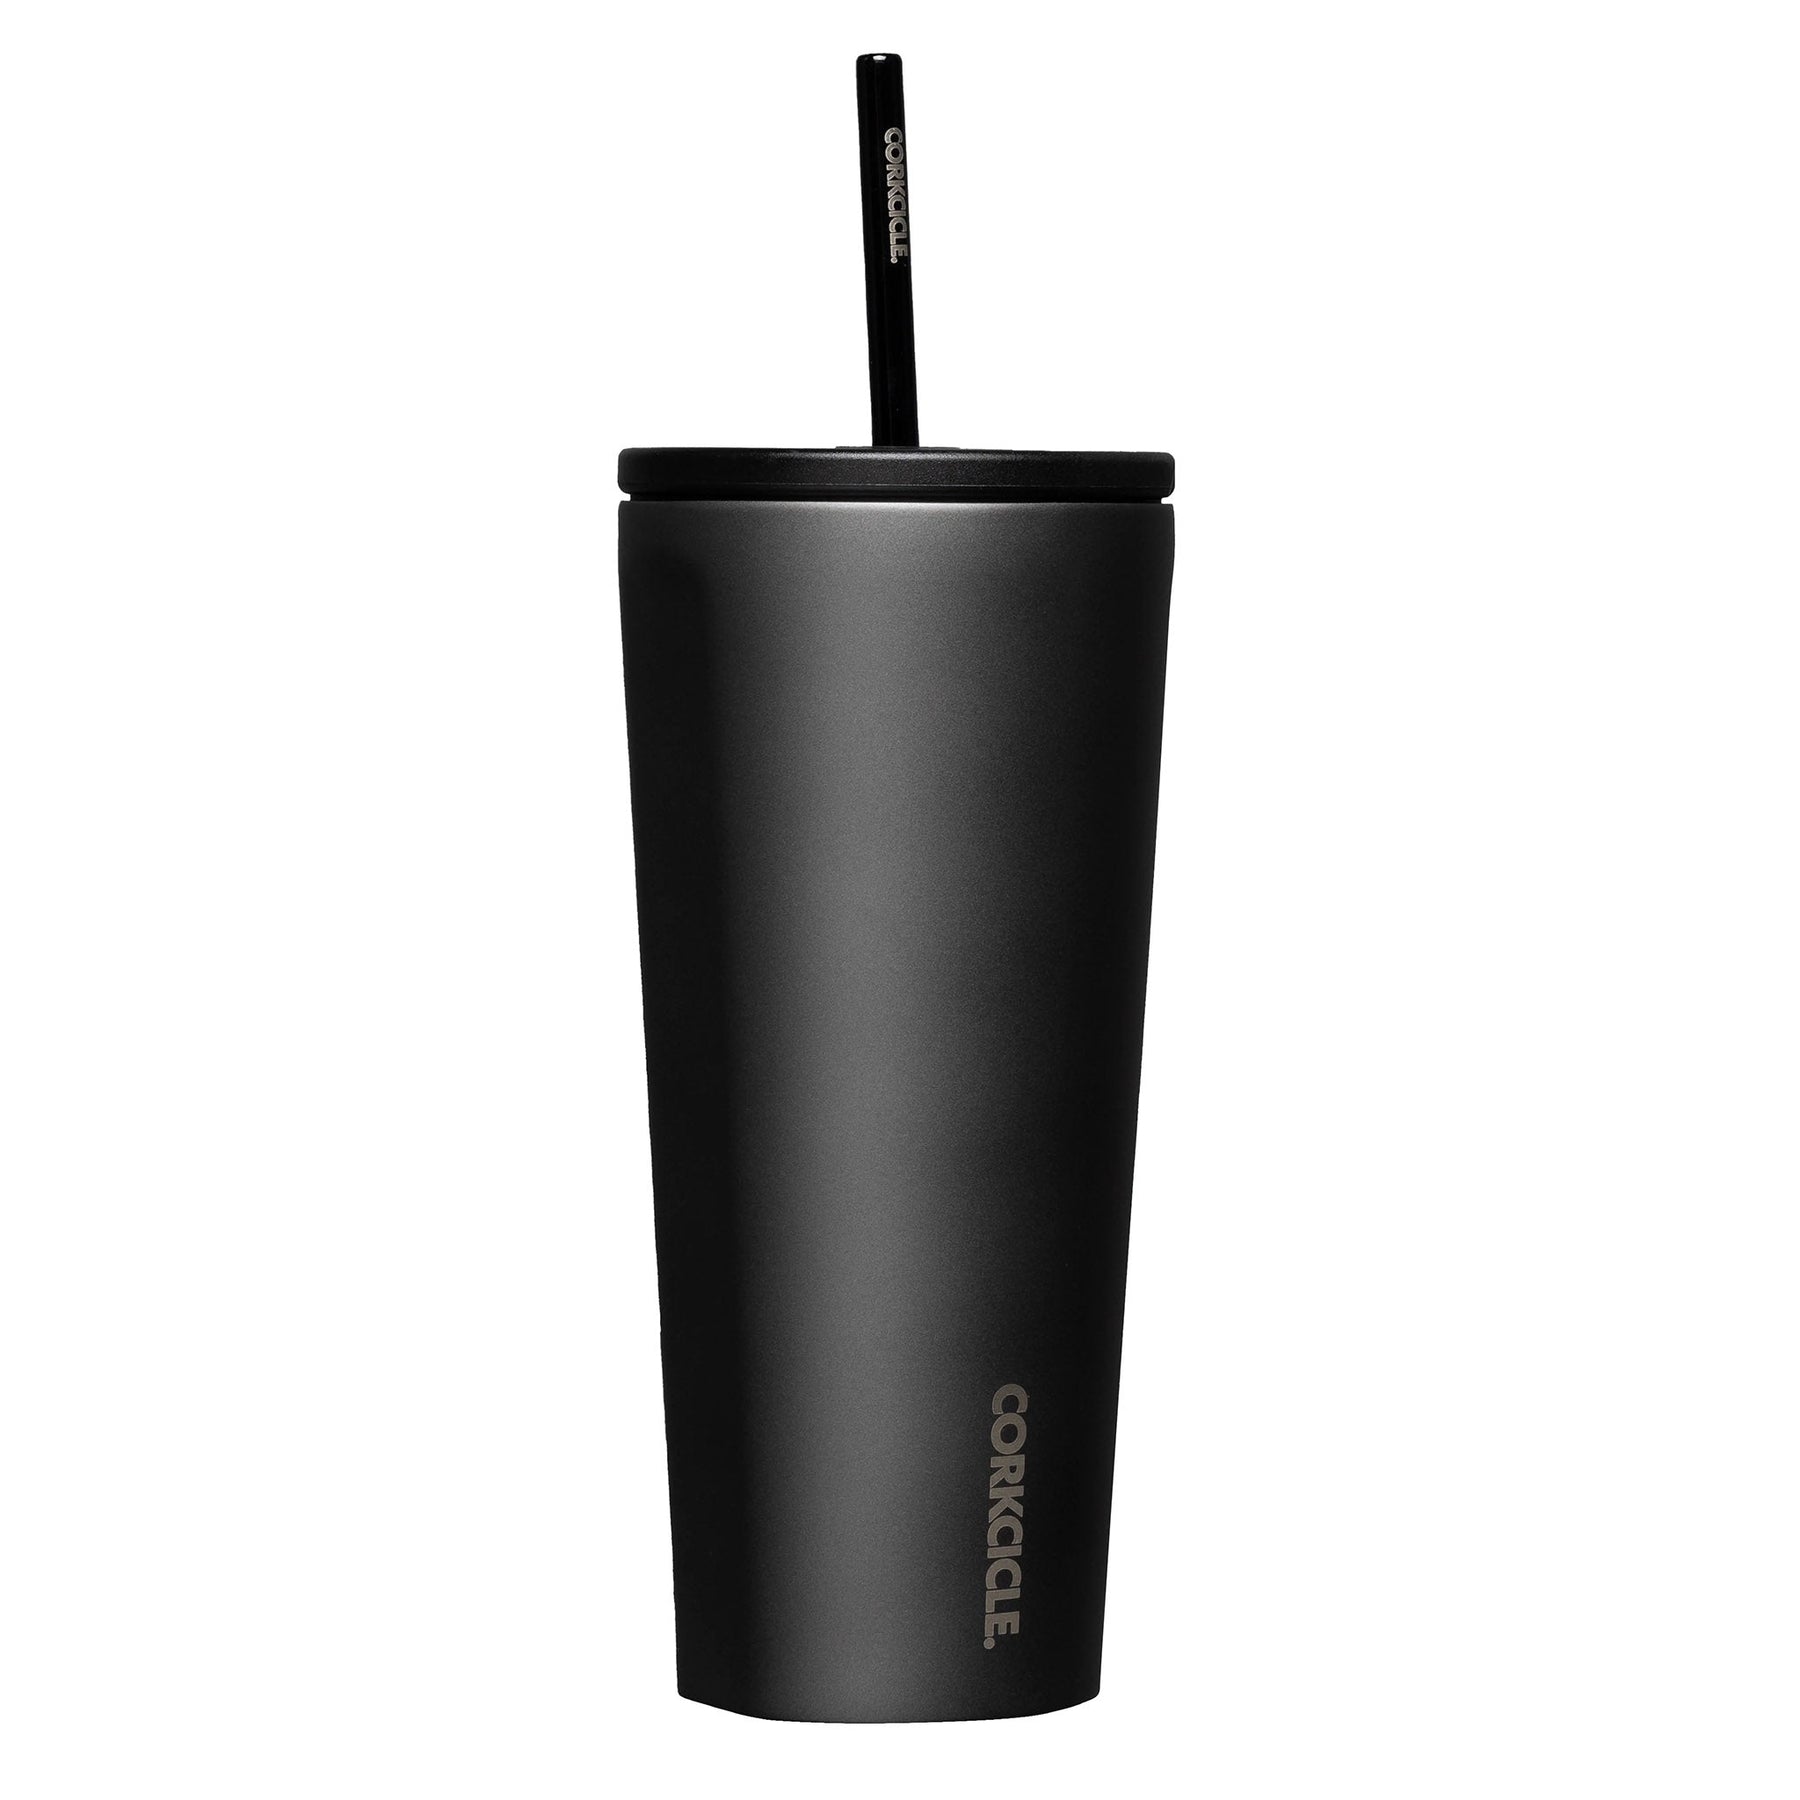 https://cdn.shopify.com/s/files/1/0019/9576/7866/files/corkcicle-2224ECS-24-ounce-ceramic-slate-insulated-cold-cup-tumbler-with-lid-and-straw-side-view_1800x1800.jpg?v=1691519303